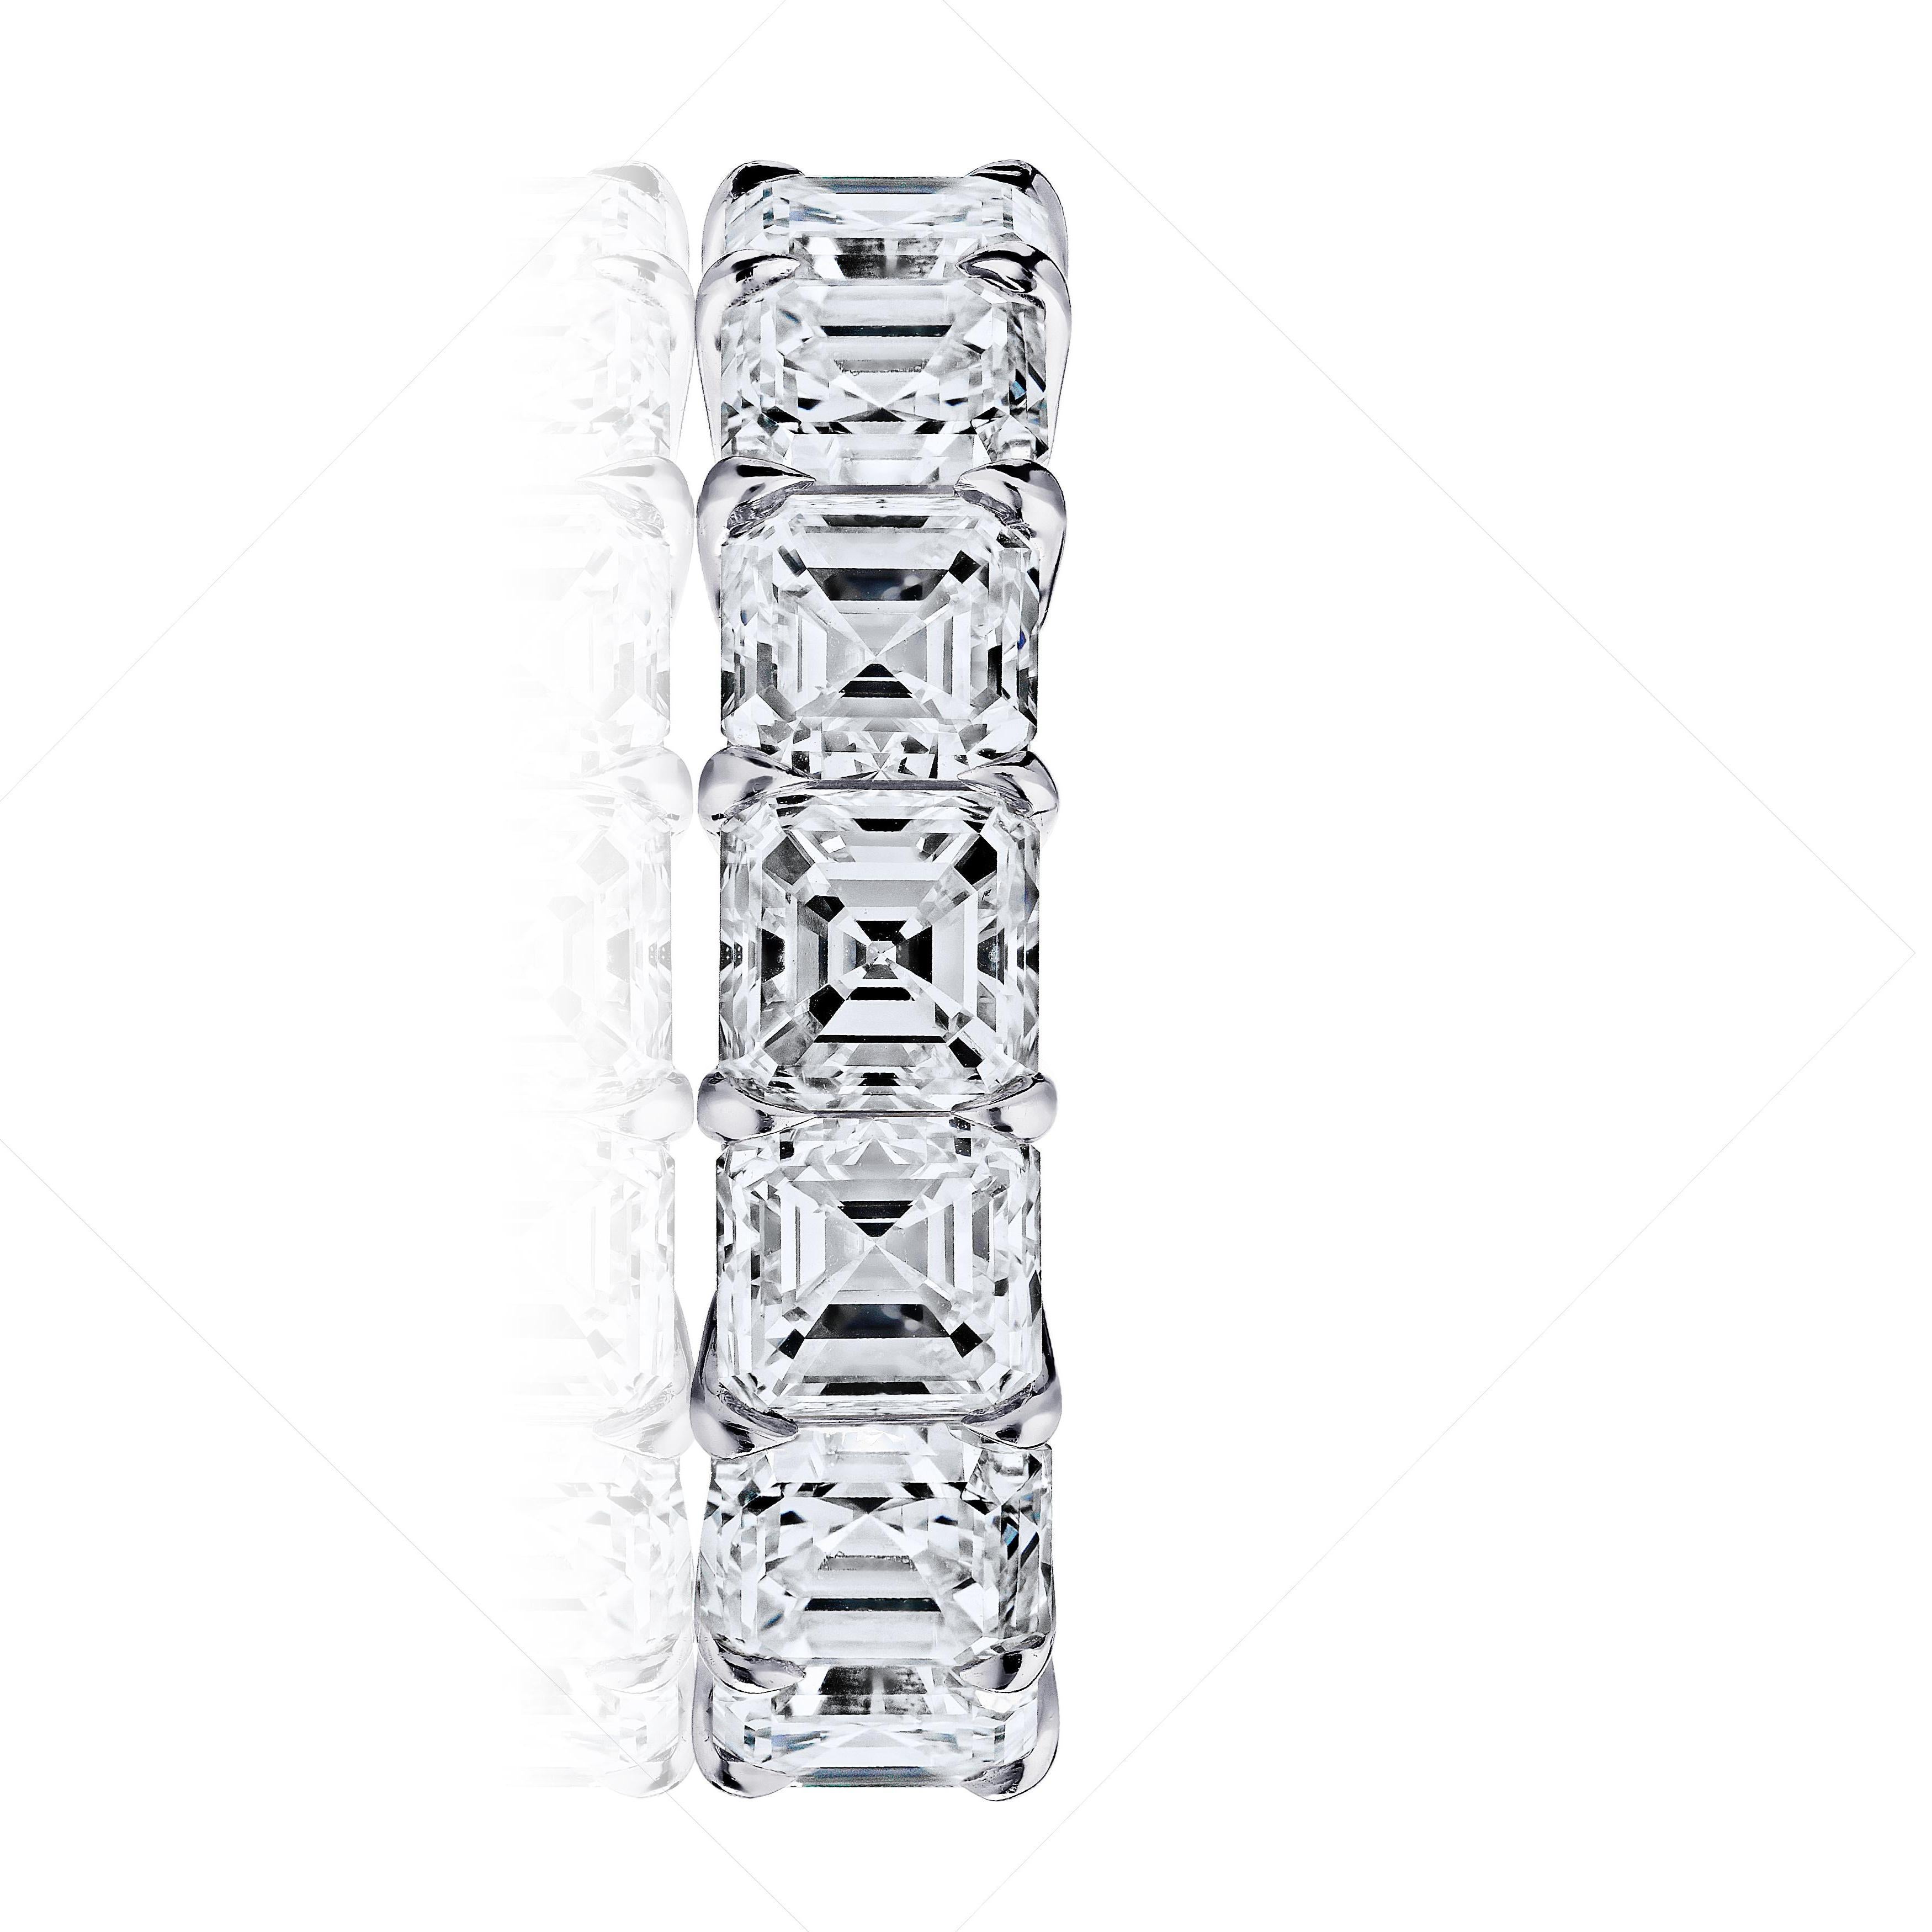 Asher Cut diamond ring platinum eternity band shared prong style with a gallery.
16 perfectly matched diamonds weighing a minimum of 8.00 cts. Finger size 7.
G.I.A certificates for each diamond . Ranging from D-F in color . VVS1-VS2 in clarity .
Lab